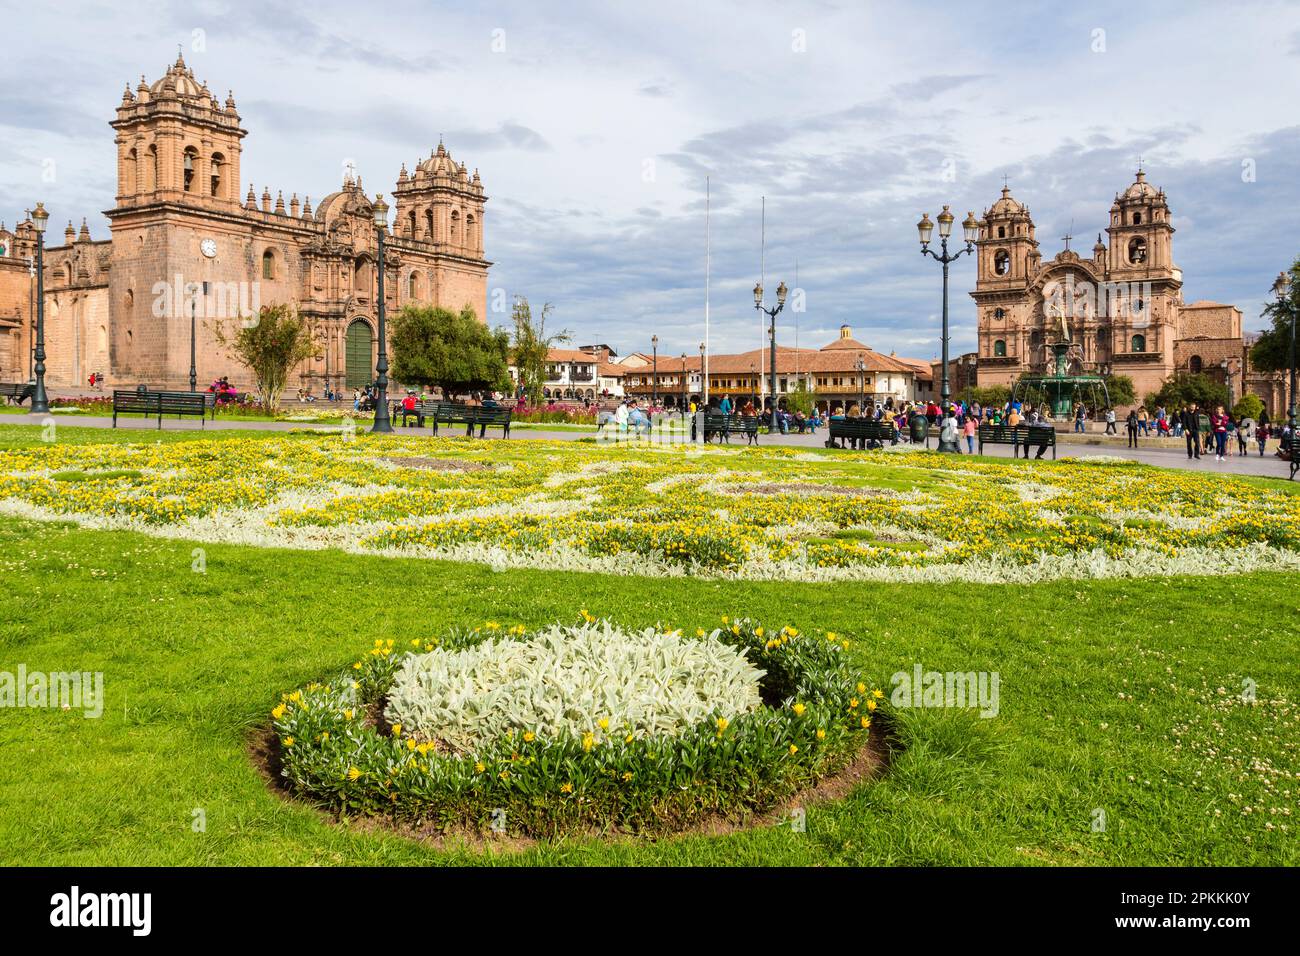 Cusco Cathedral and Church of Society of Jesus, Plaza de Armas main square, UNESCO World Heritage Site, Cusco, Peru, South America Stock Photo